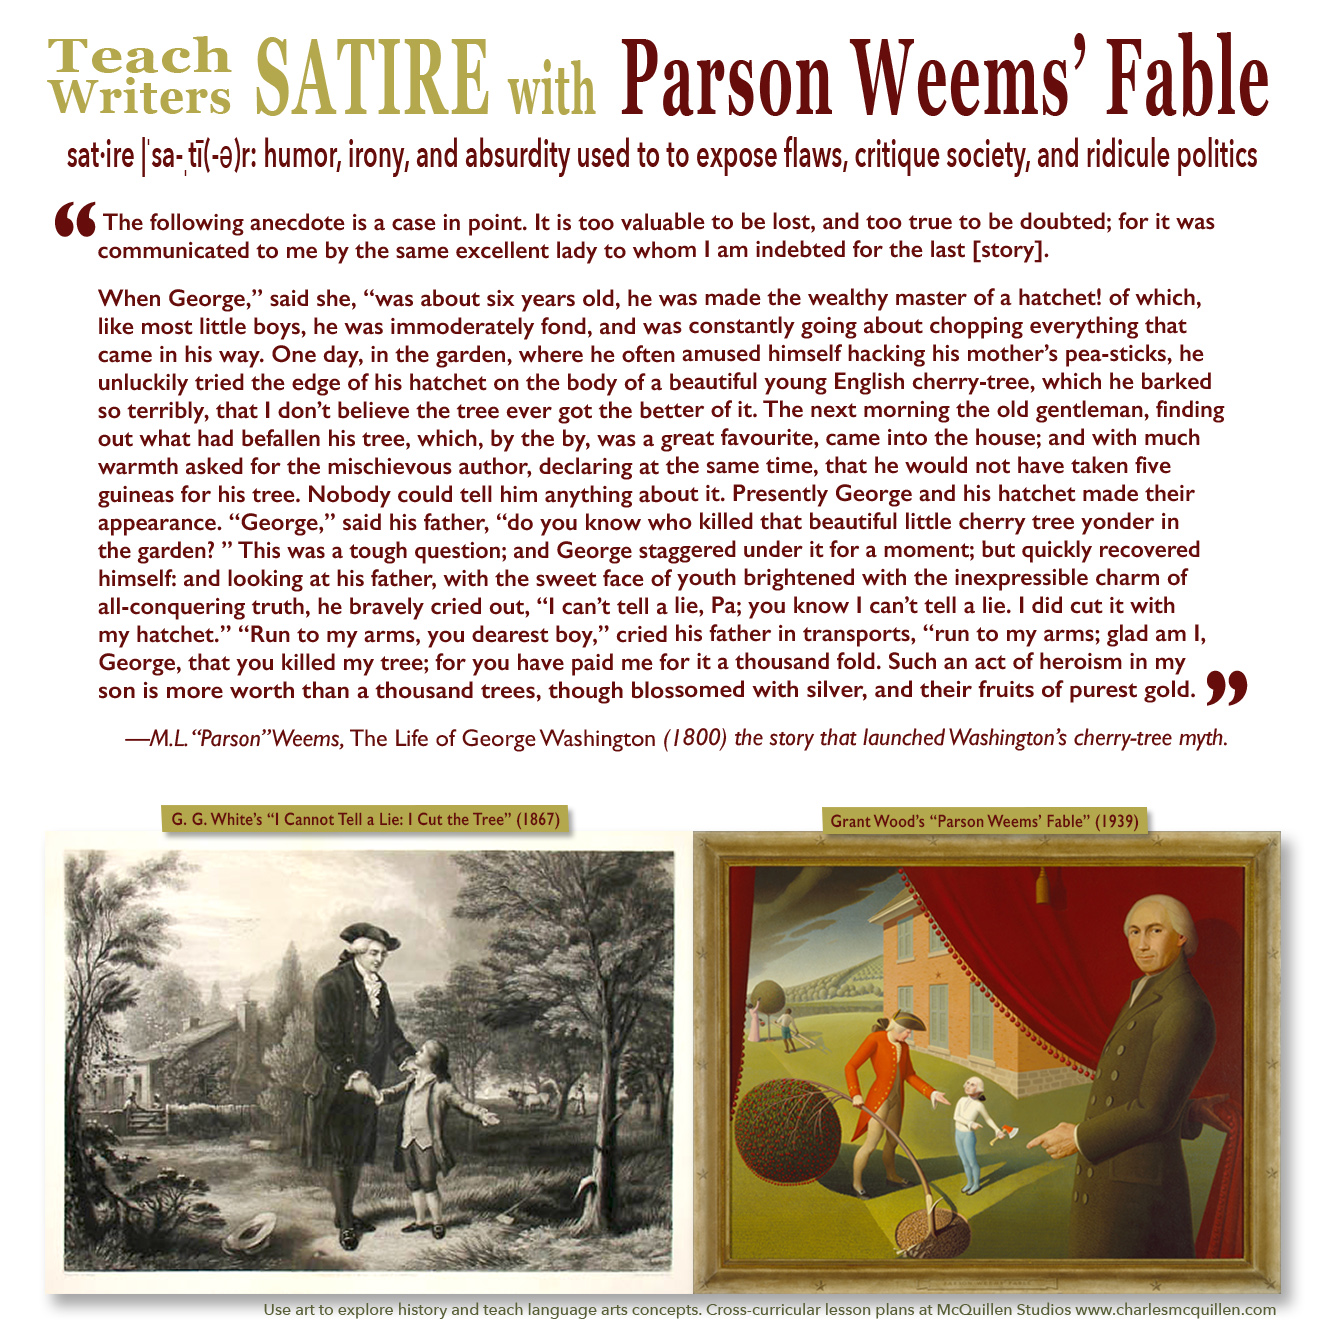 Teach writers about satire with Grant Wood's Parson Weems' Fable